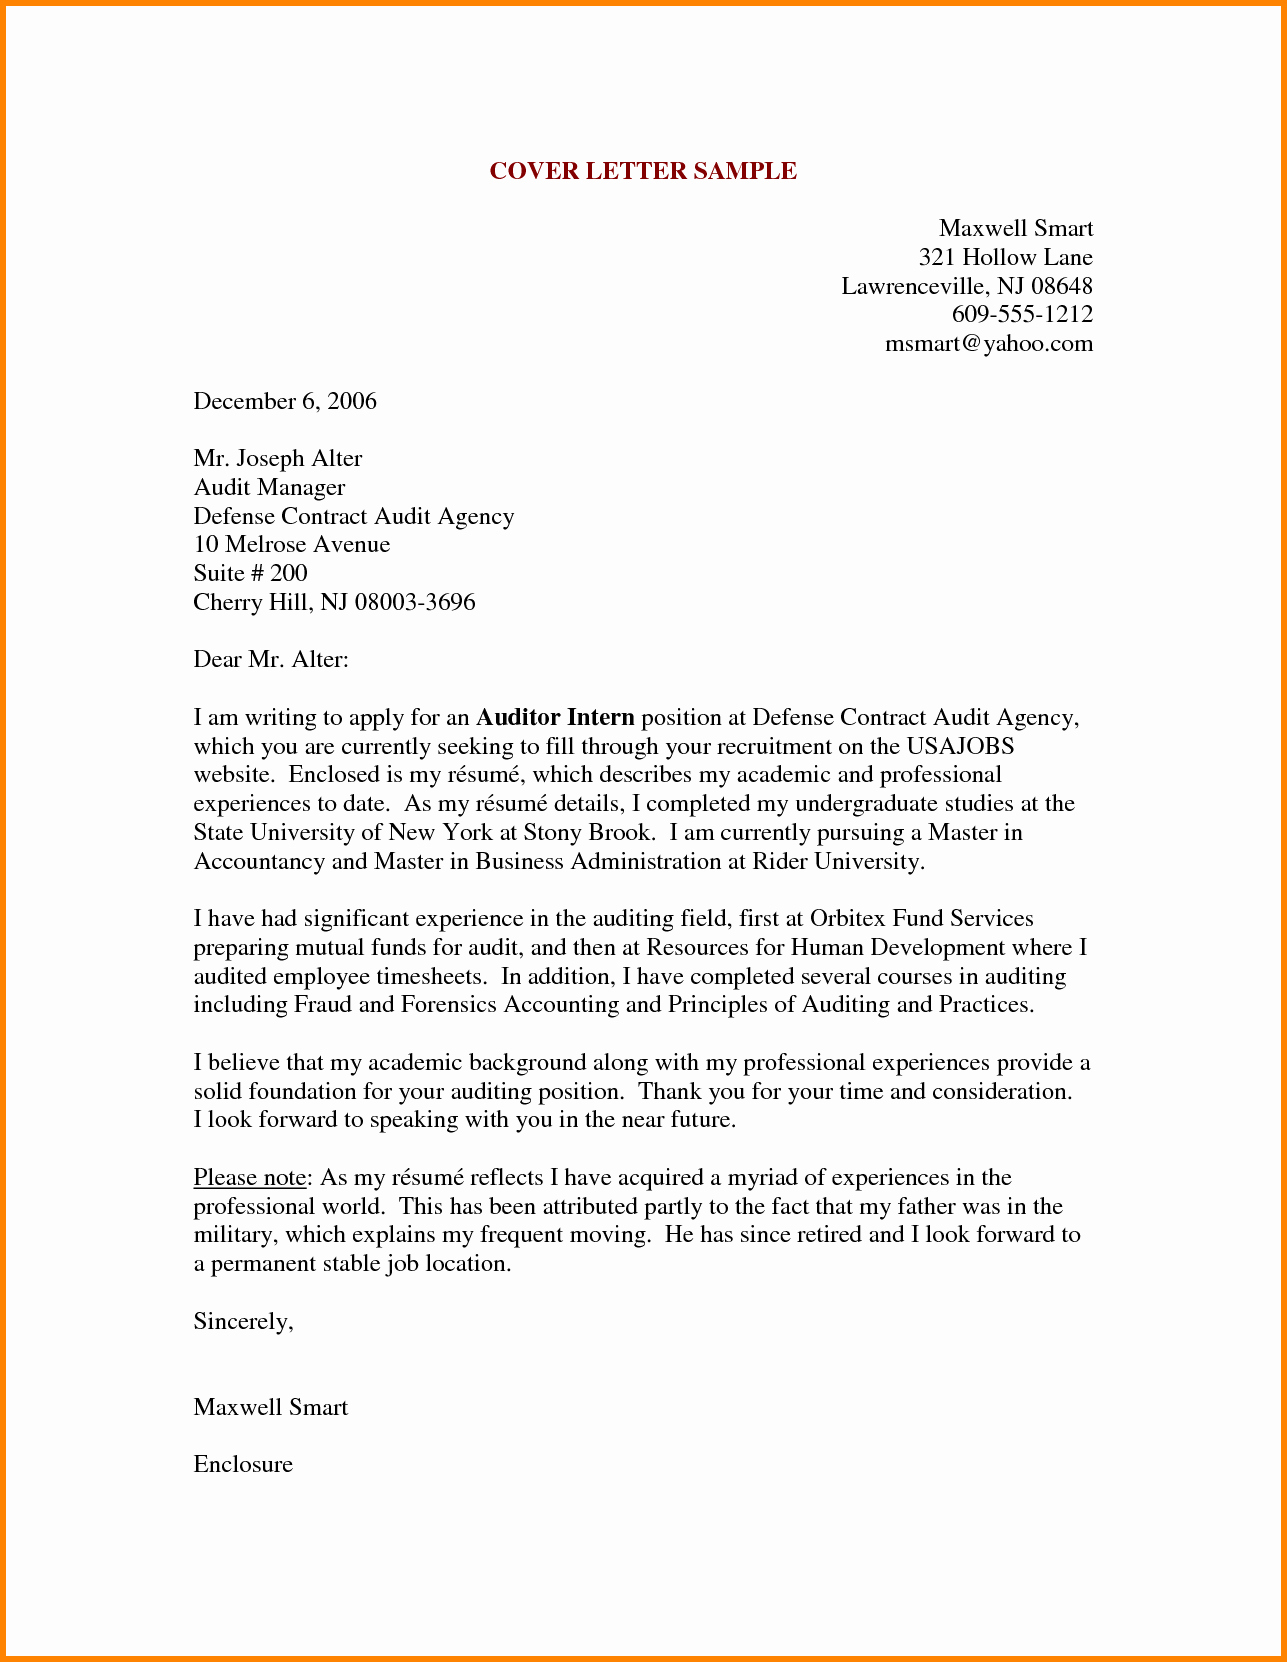 Temp to Perm Offer Letter Template - Advertising Agency Contract Template Elegant Advertising Agency